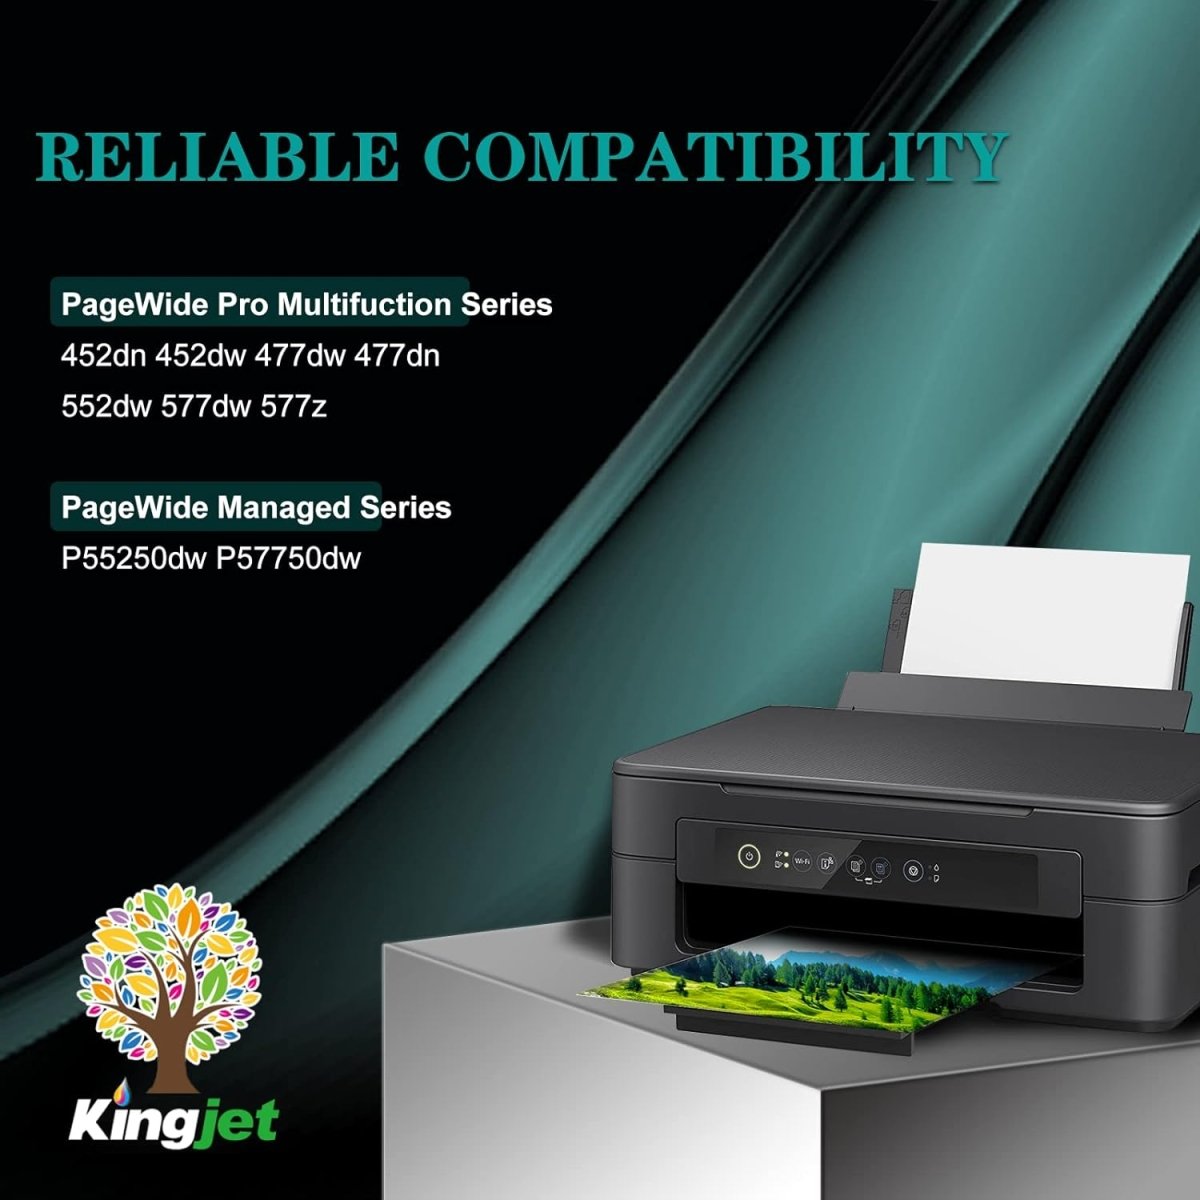 Compatible HP 972X High Yield Magenta PageWide Cartridge, L0S01AN - Linford Office:Printer Ink & Toner Cartridge